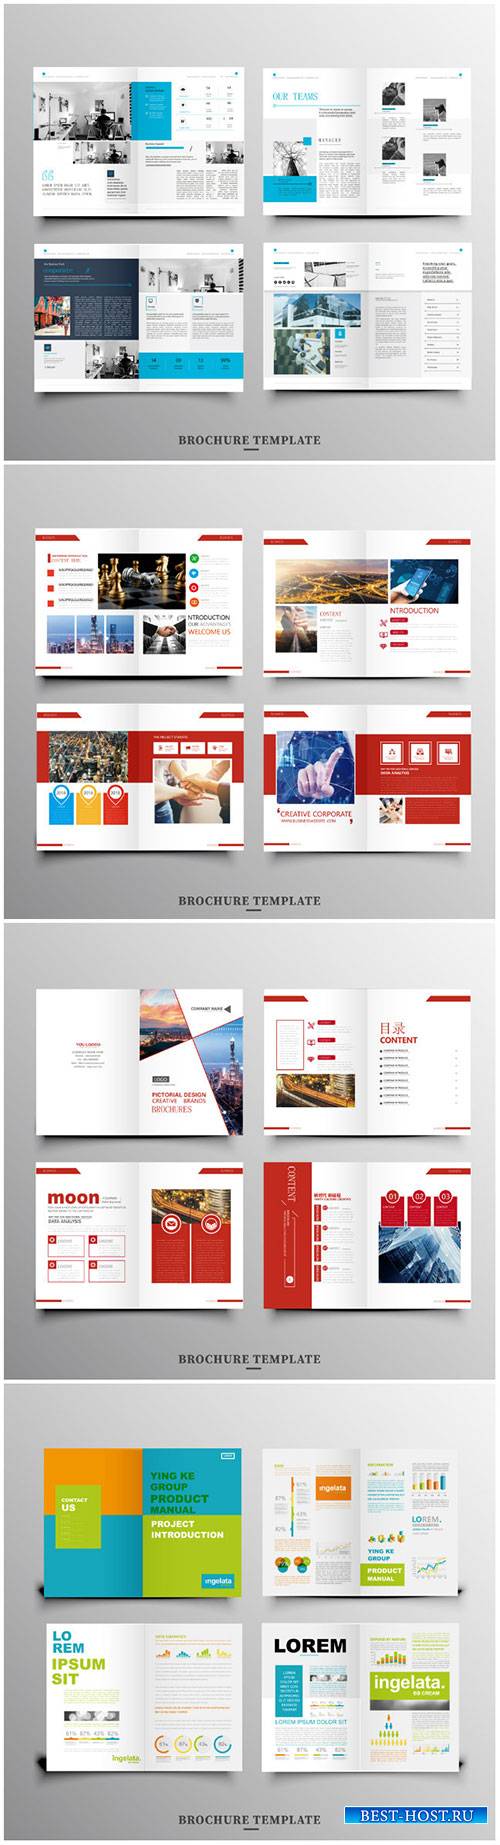 Brochure template vector layout design, corporate business annual report, magazine, flyer mockup # 245